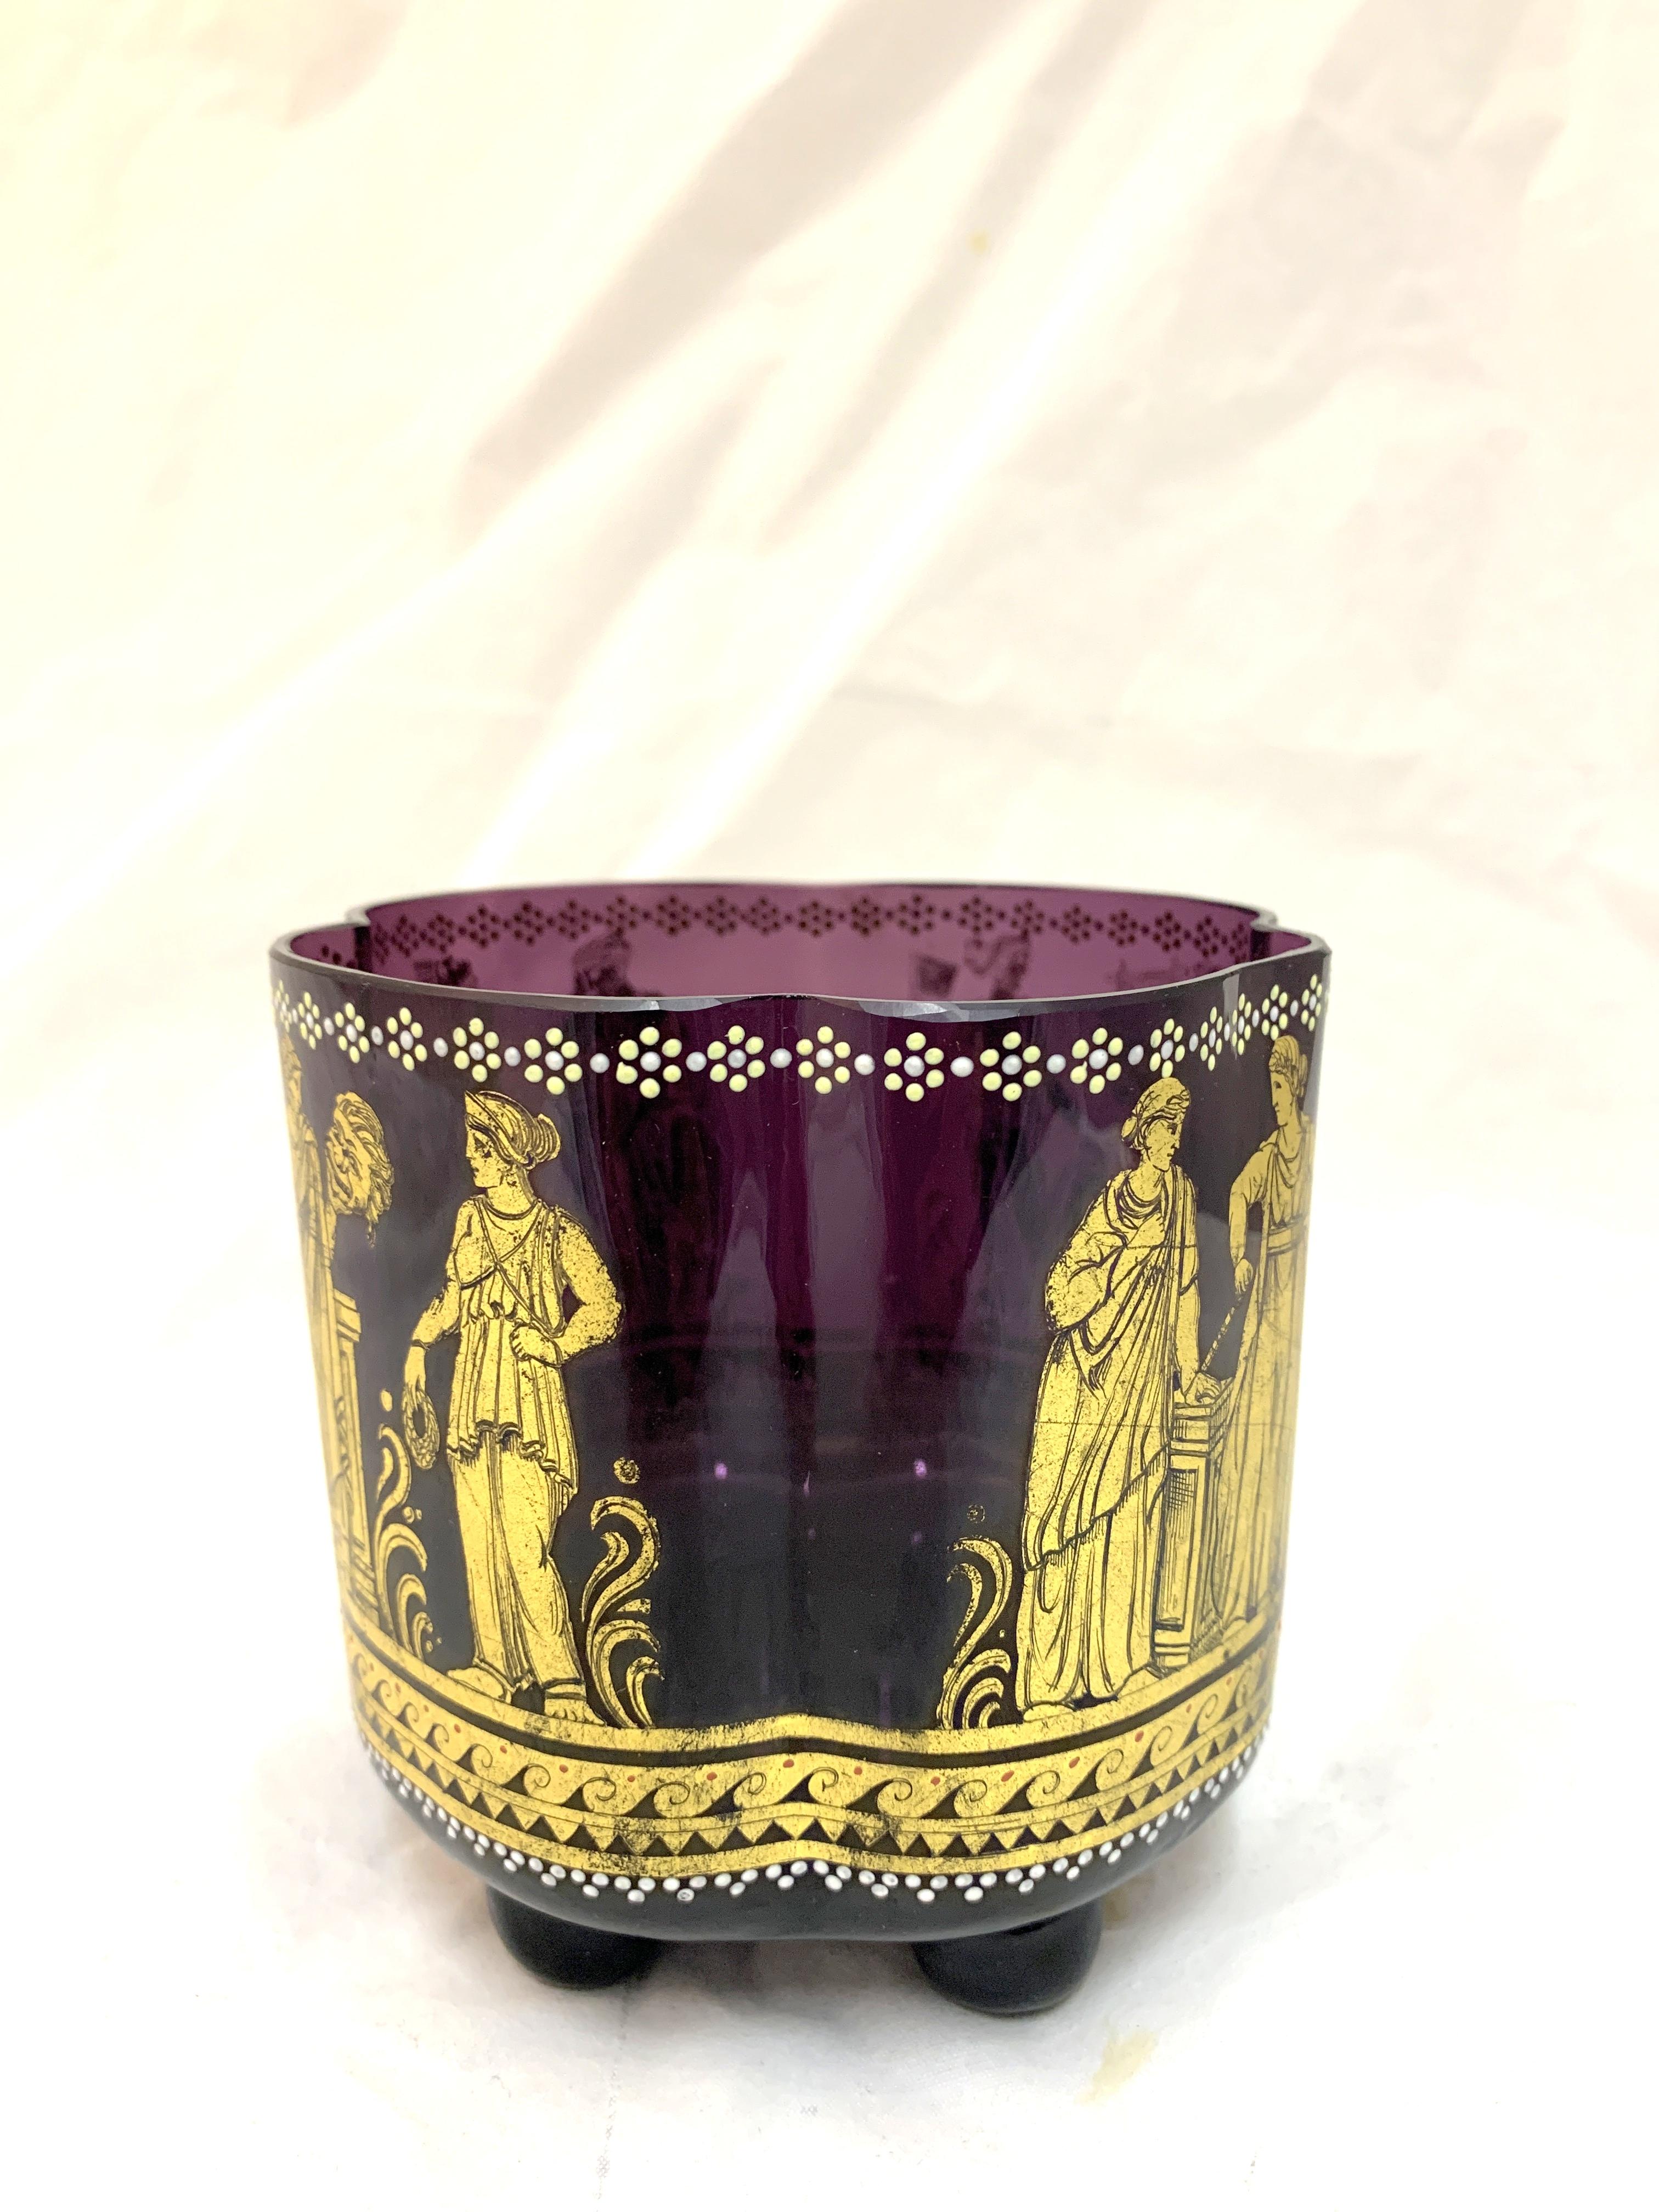 Venetian style glass bowl by Johann Oertel & Co Haida in purple with hand painted and gold plated details.